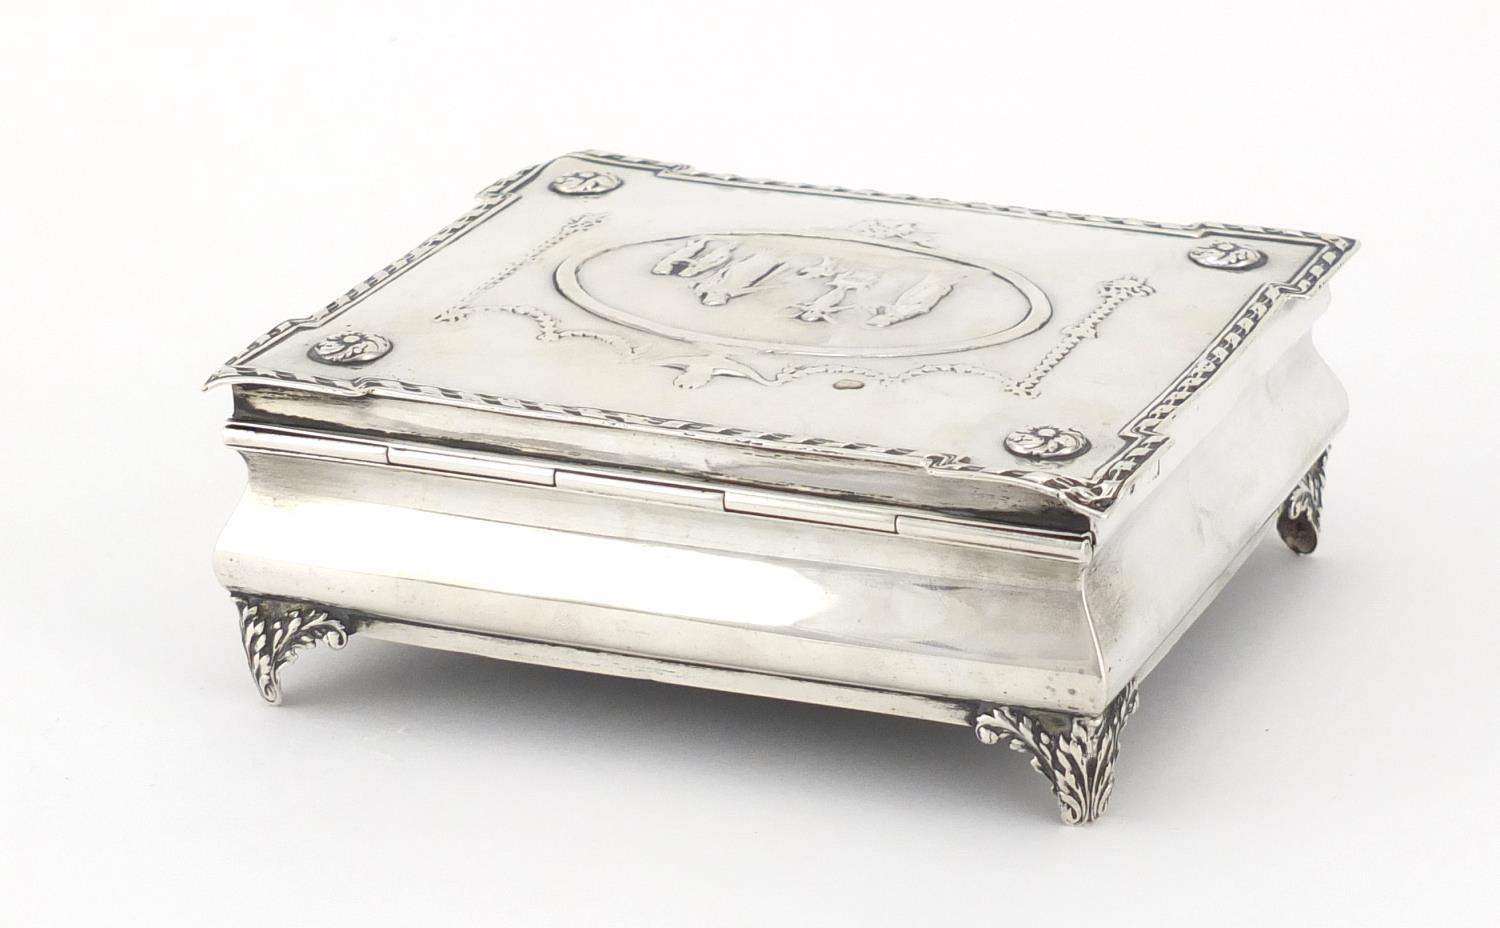 Rectangular silver jewel box by William Comyns, the hinged lid embossed with maidens, putti, swags - Image 6 of 8